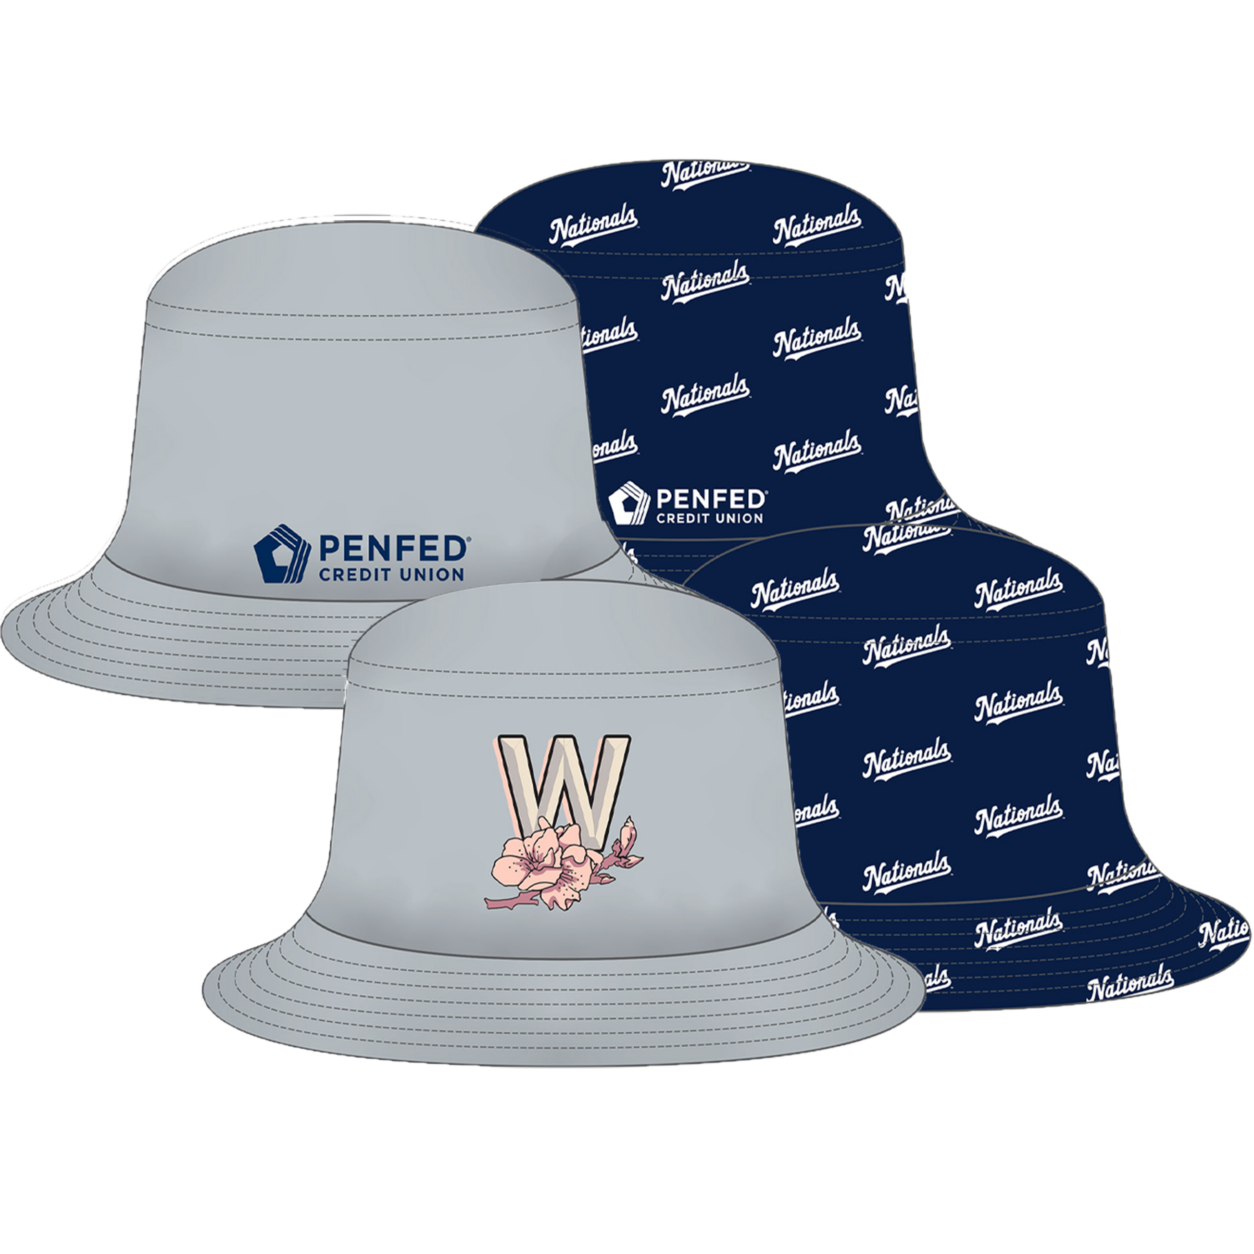 Opening Day Reversible Bucket Hat presented by PenFed